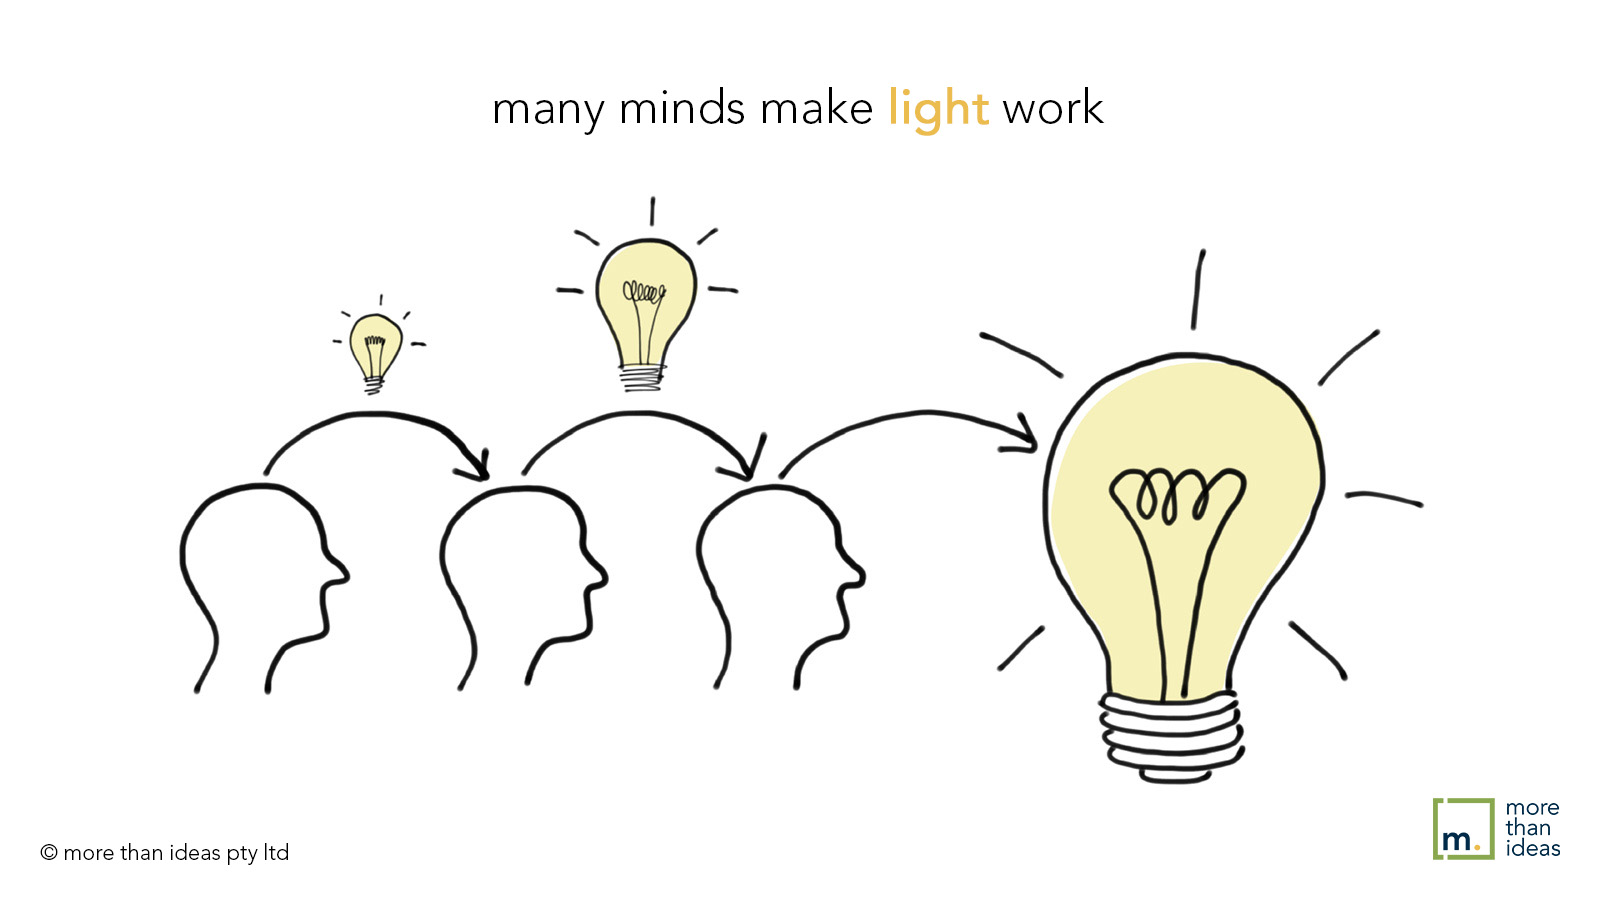 illustration depicting an idea growing across 3 heads. It grows consecutively. The last lightbulb is the biggest and fully lit. The heading "many minds make light work" is a play on words.